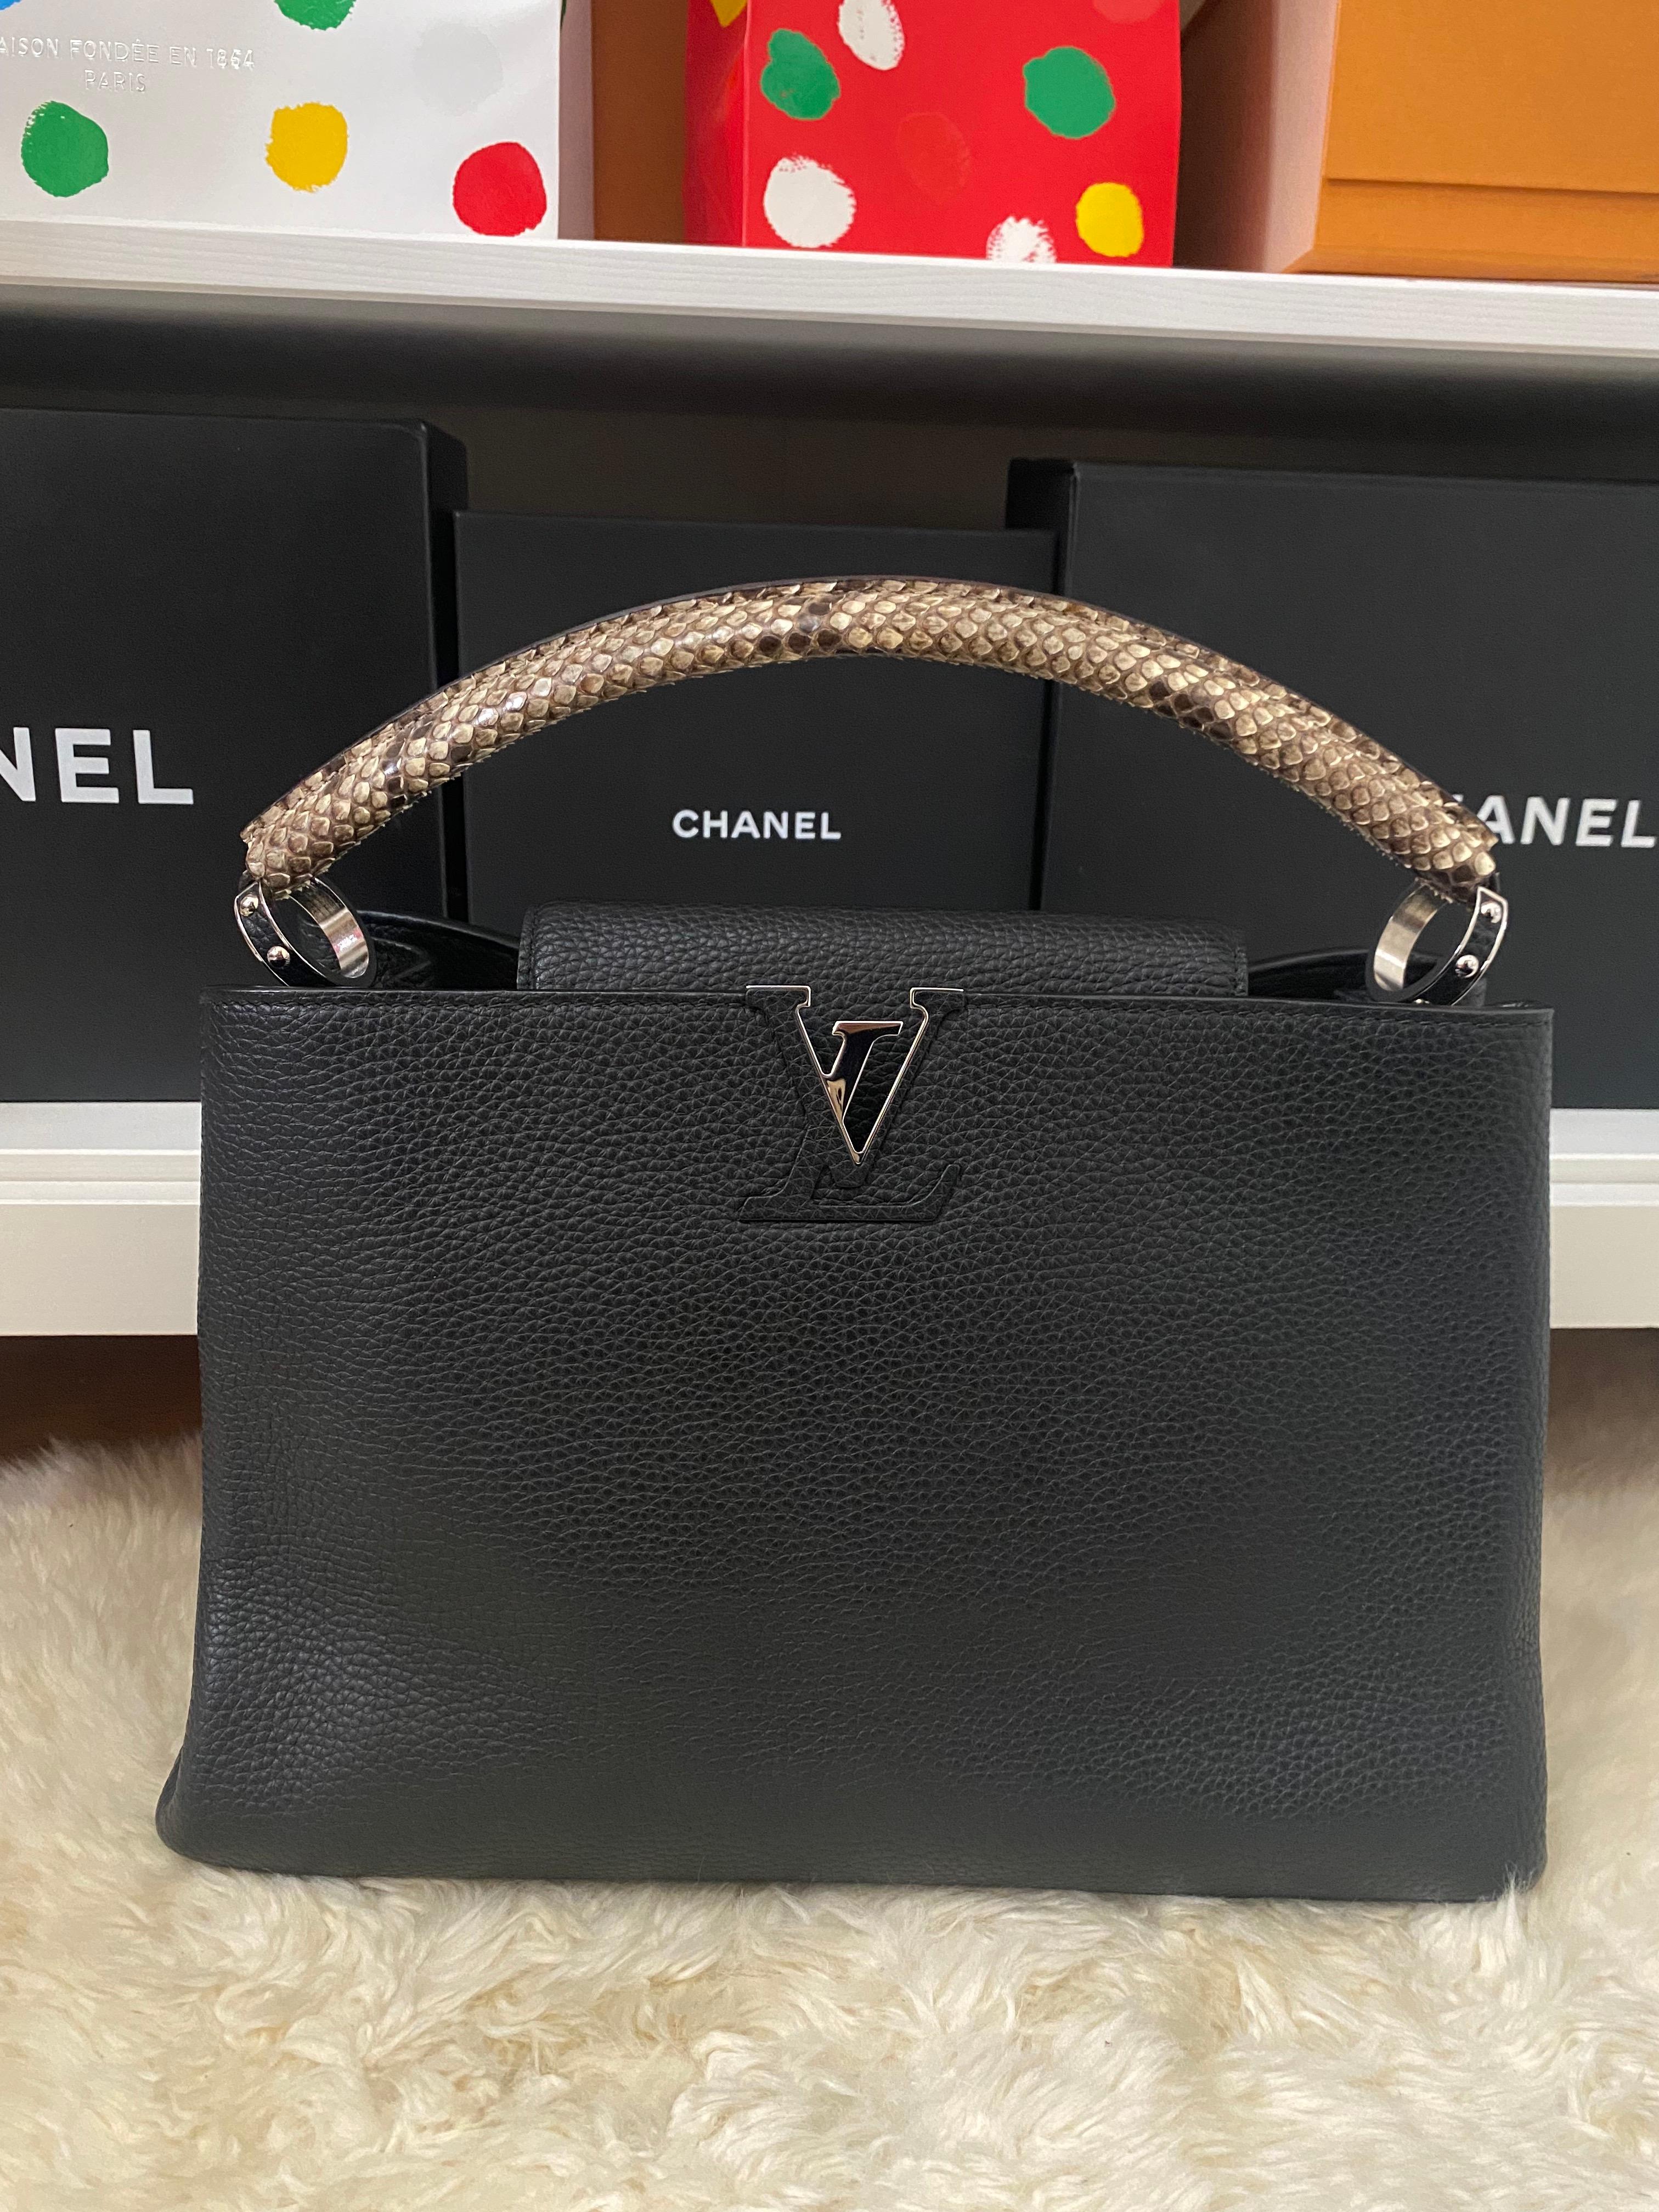 Louis Vuitton Capucines Python Handle MM
Exterior Color: Black
Interior Color: Black
Exterior Material: Leather, Python, Exotic
Interior Material: Leather
Hardware Color: Silver
Accessories: No Accessories
SIZE AND FIT: 14